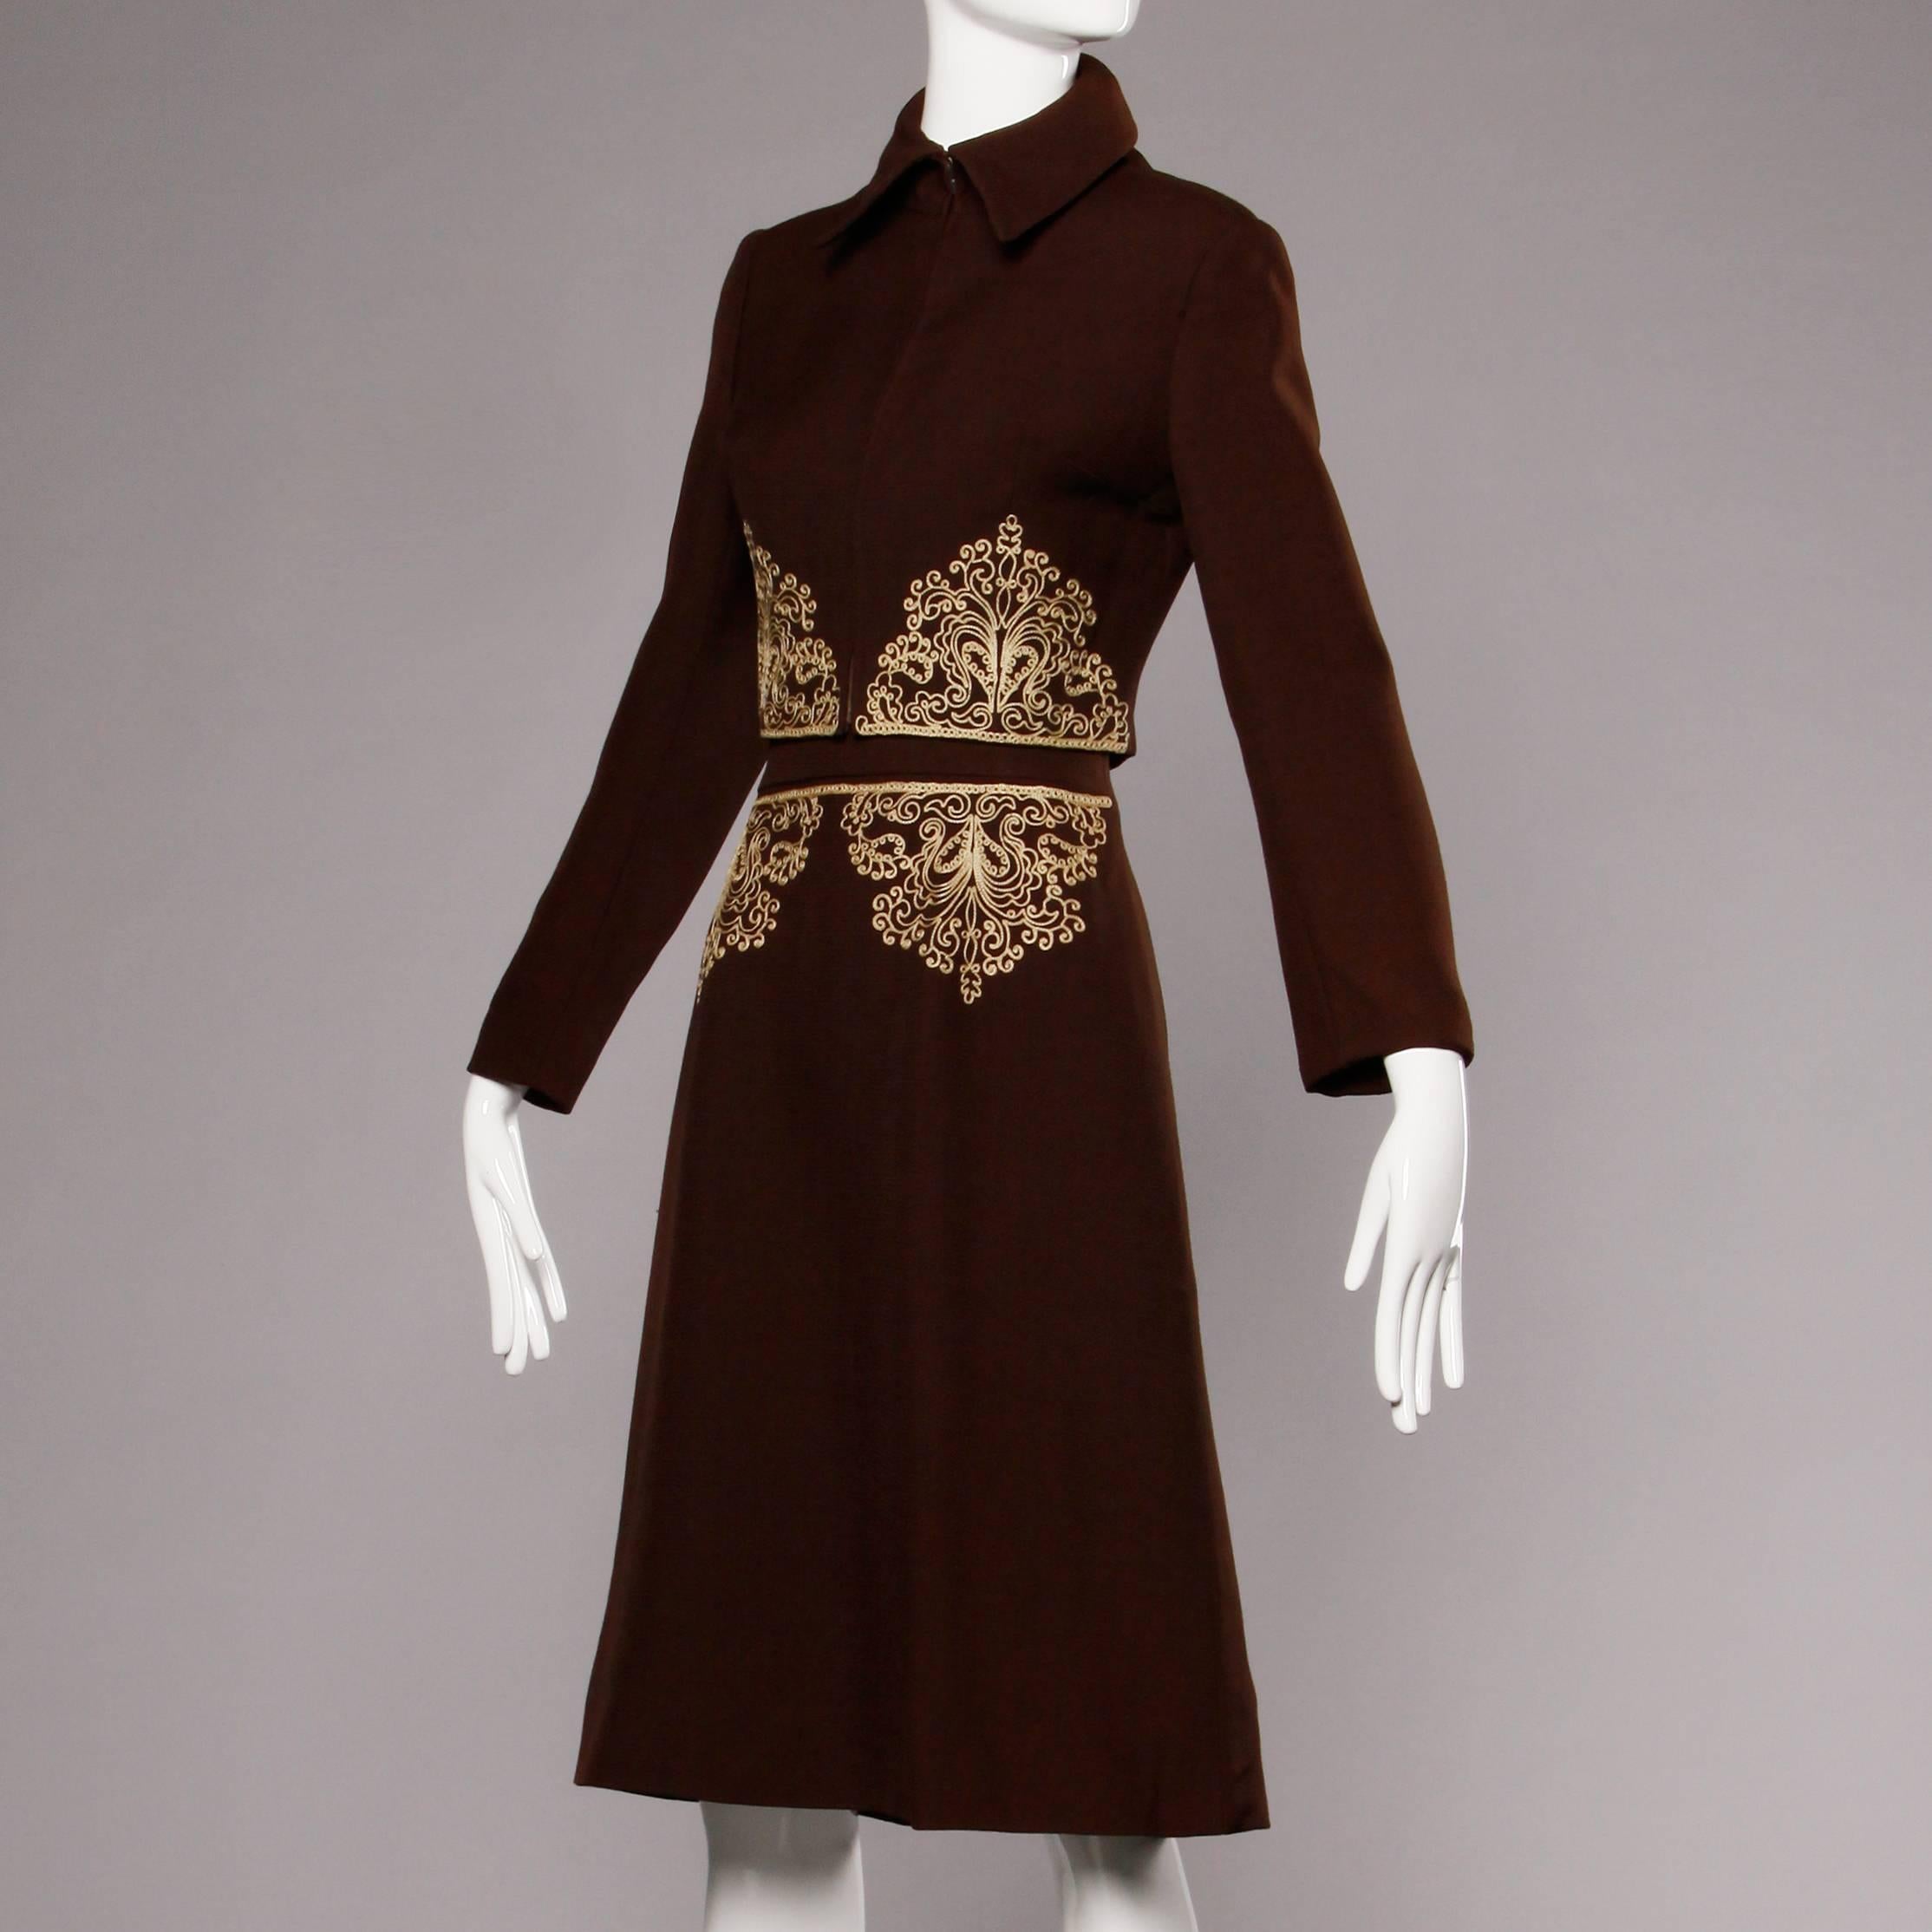 Women's 1960s Vintage English-Made Wool Jacket + Skirt Ensemble with Embroidery